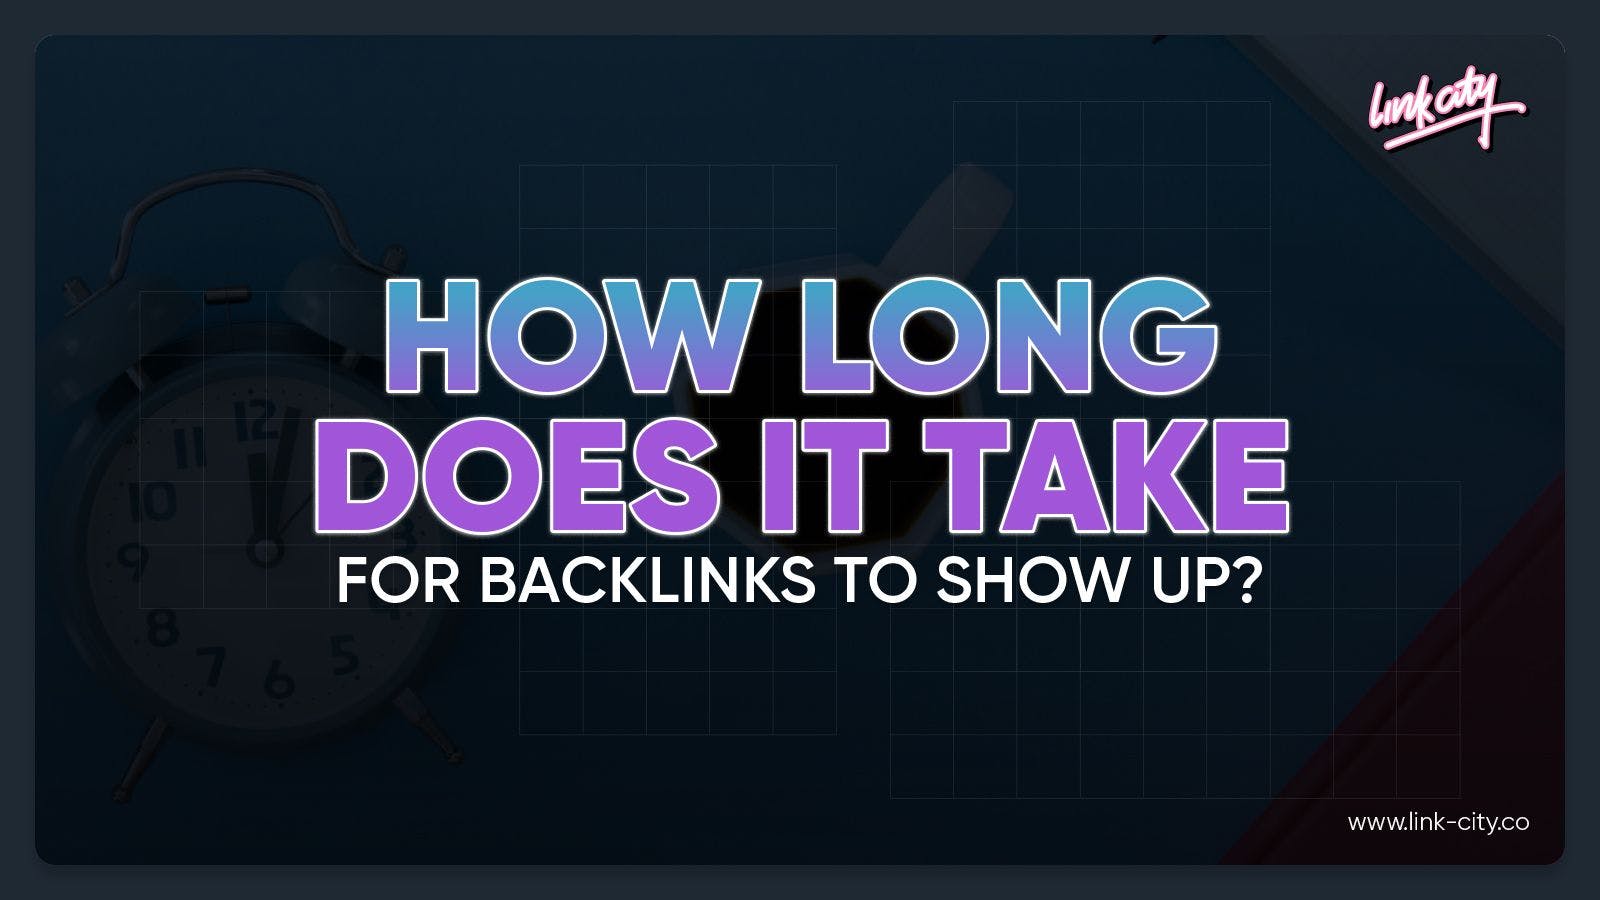 How Long Does It Take For Backlinks To Show Up?